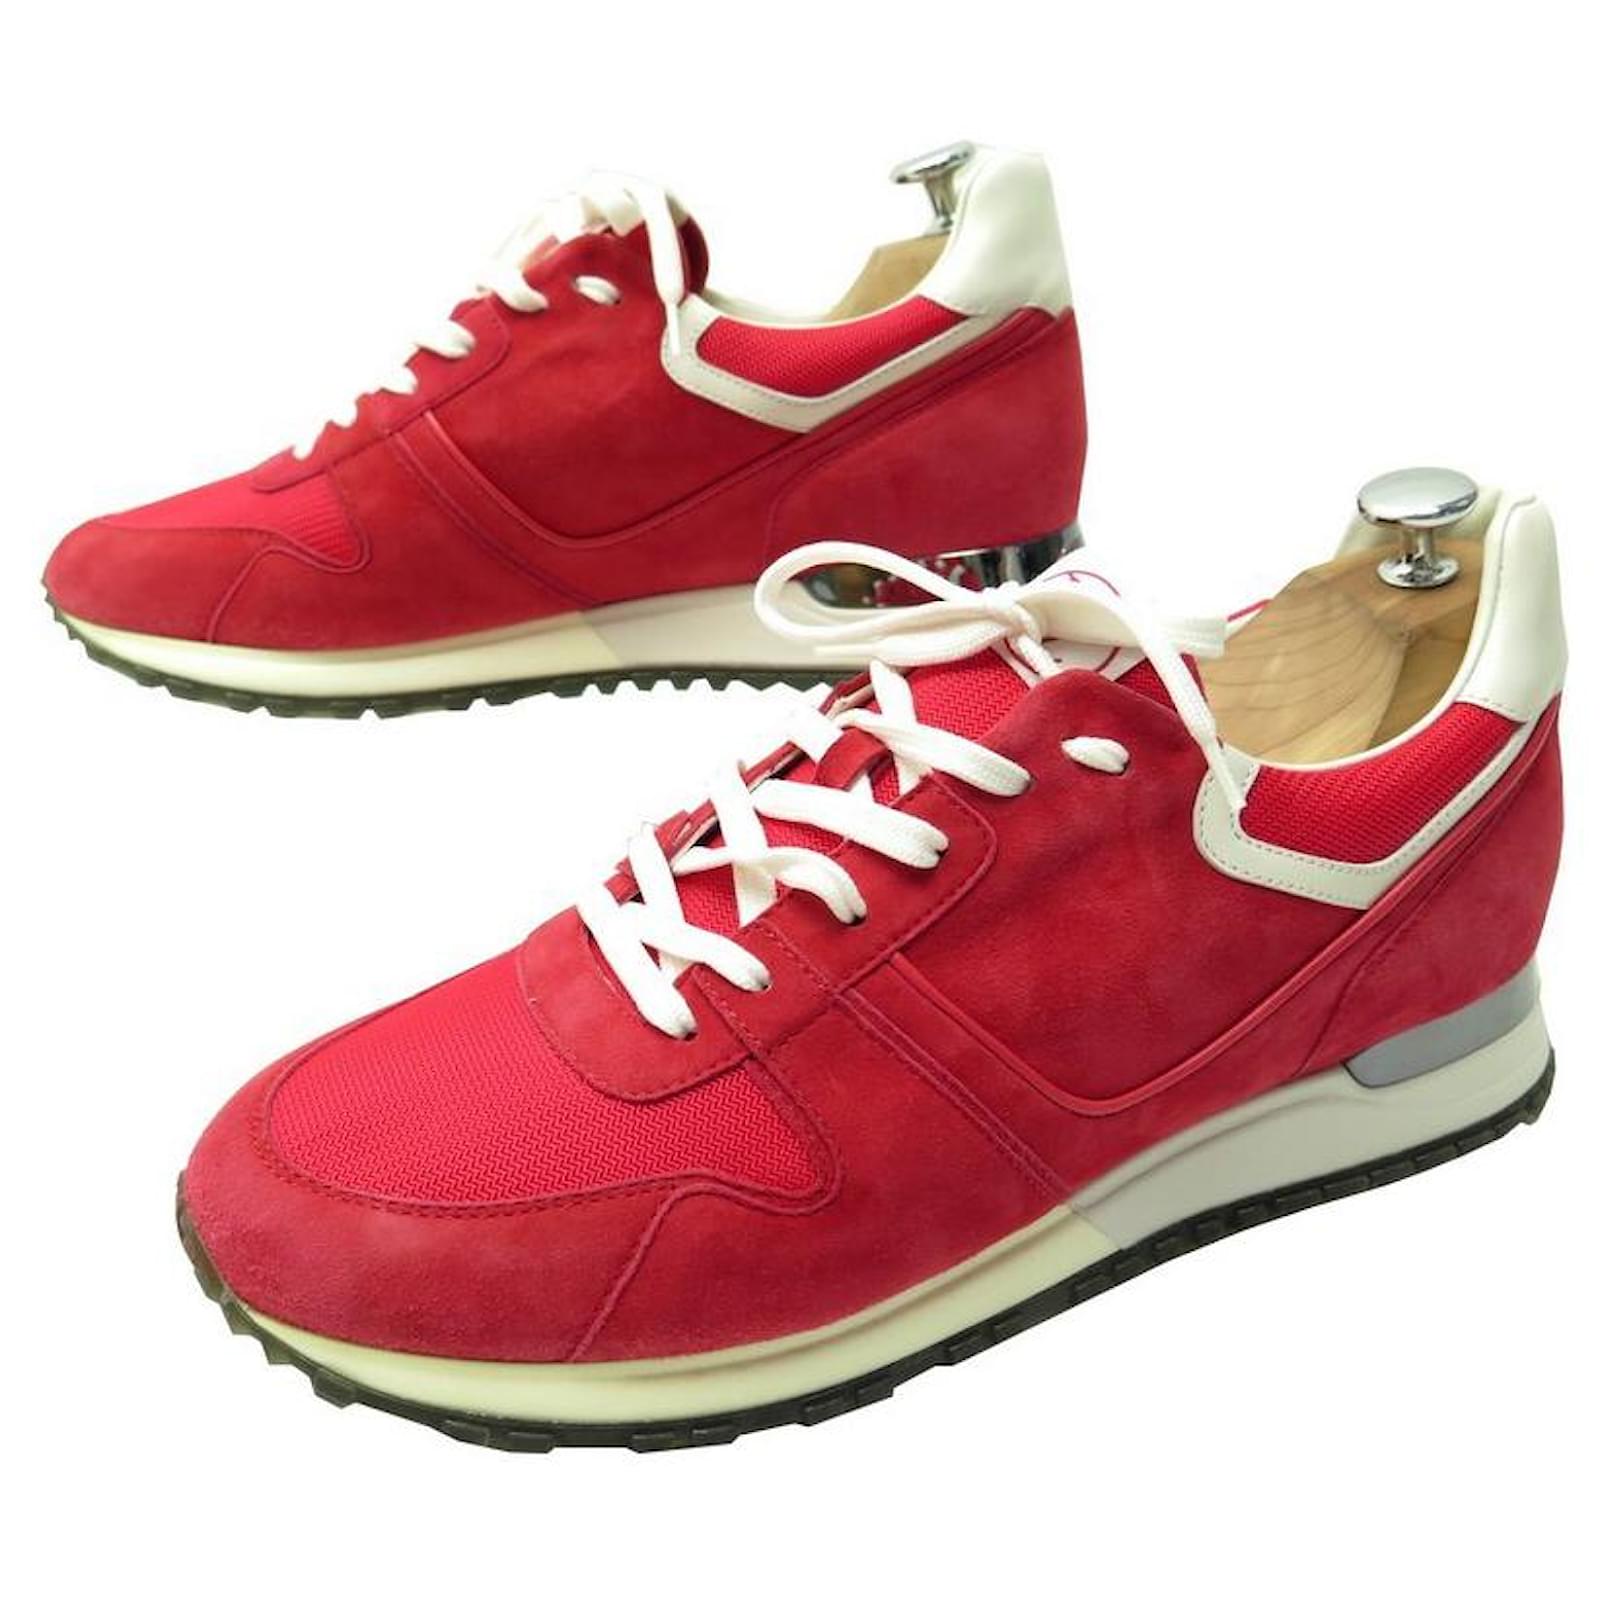 NEW LOUIS VUITTON RUNAWAY SHOES 41 RED SUEDE SNEAKERS SUEDE